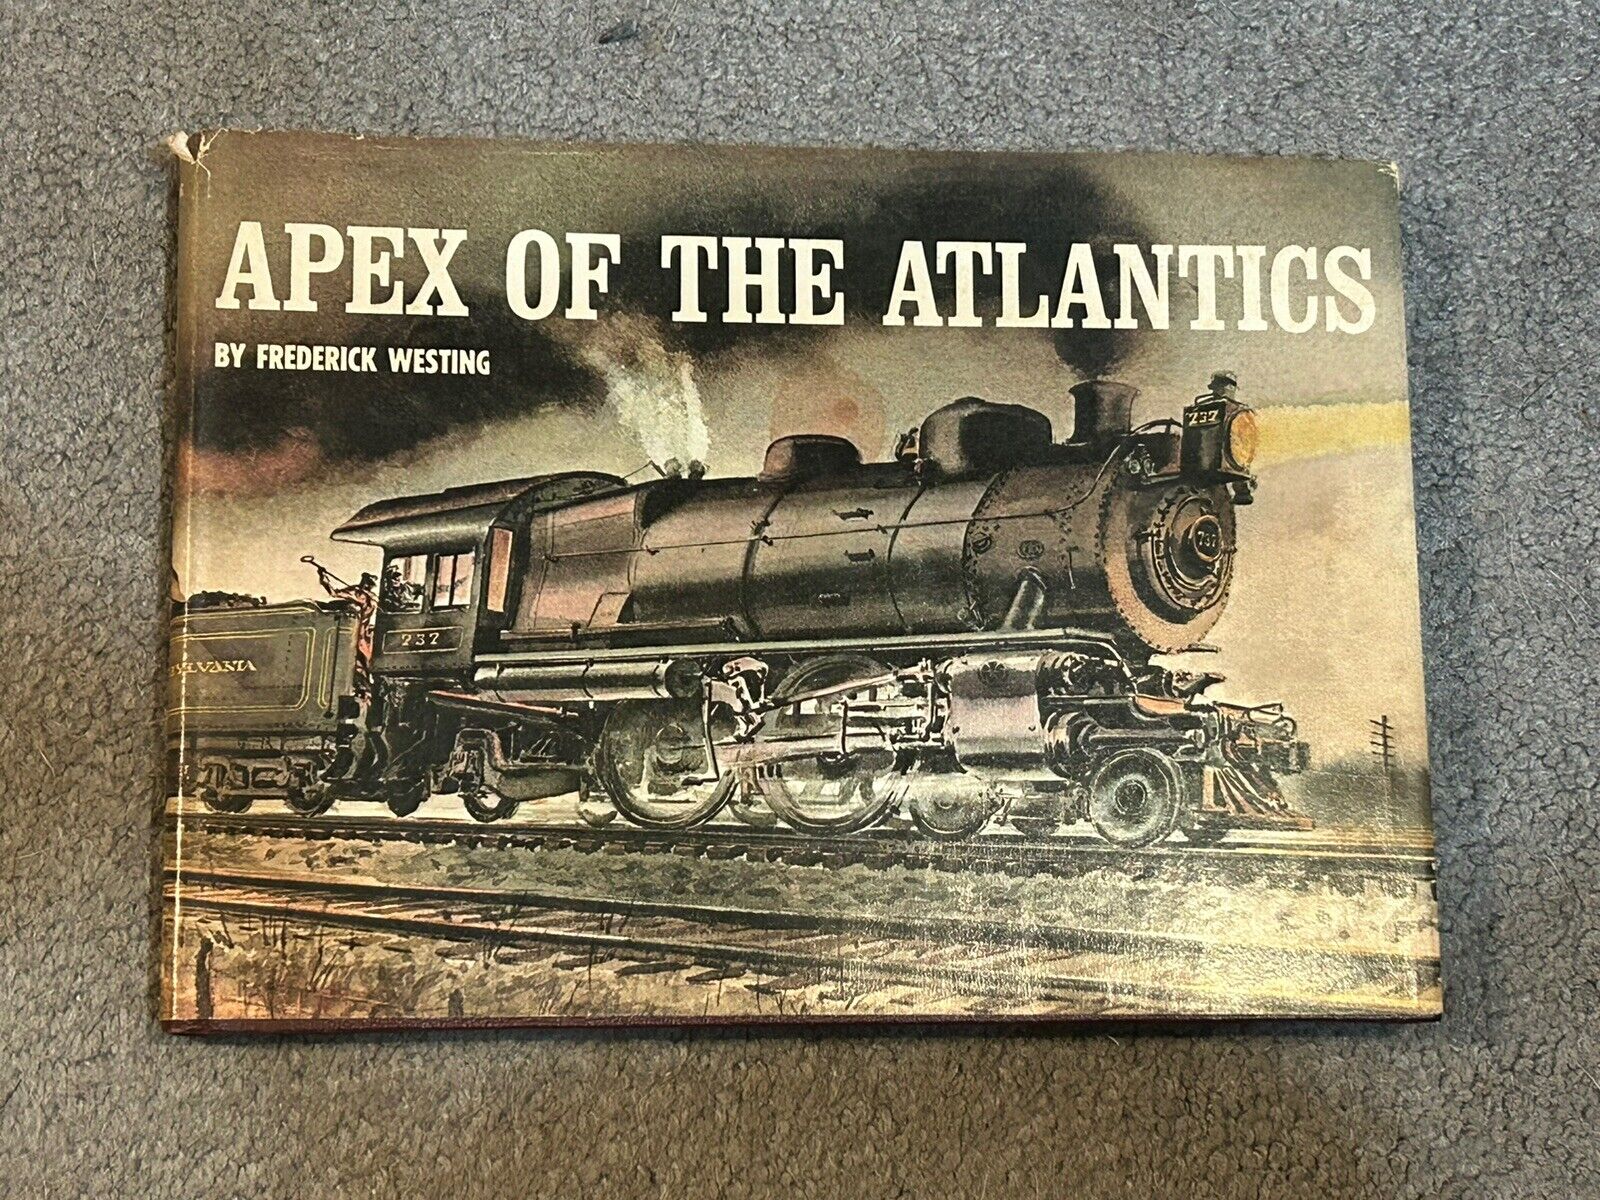 Apex of the Atlantics by Frederick Westing (hardcover, 1963)